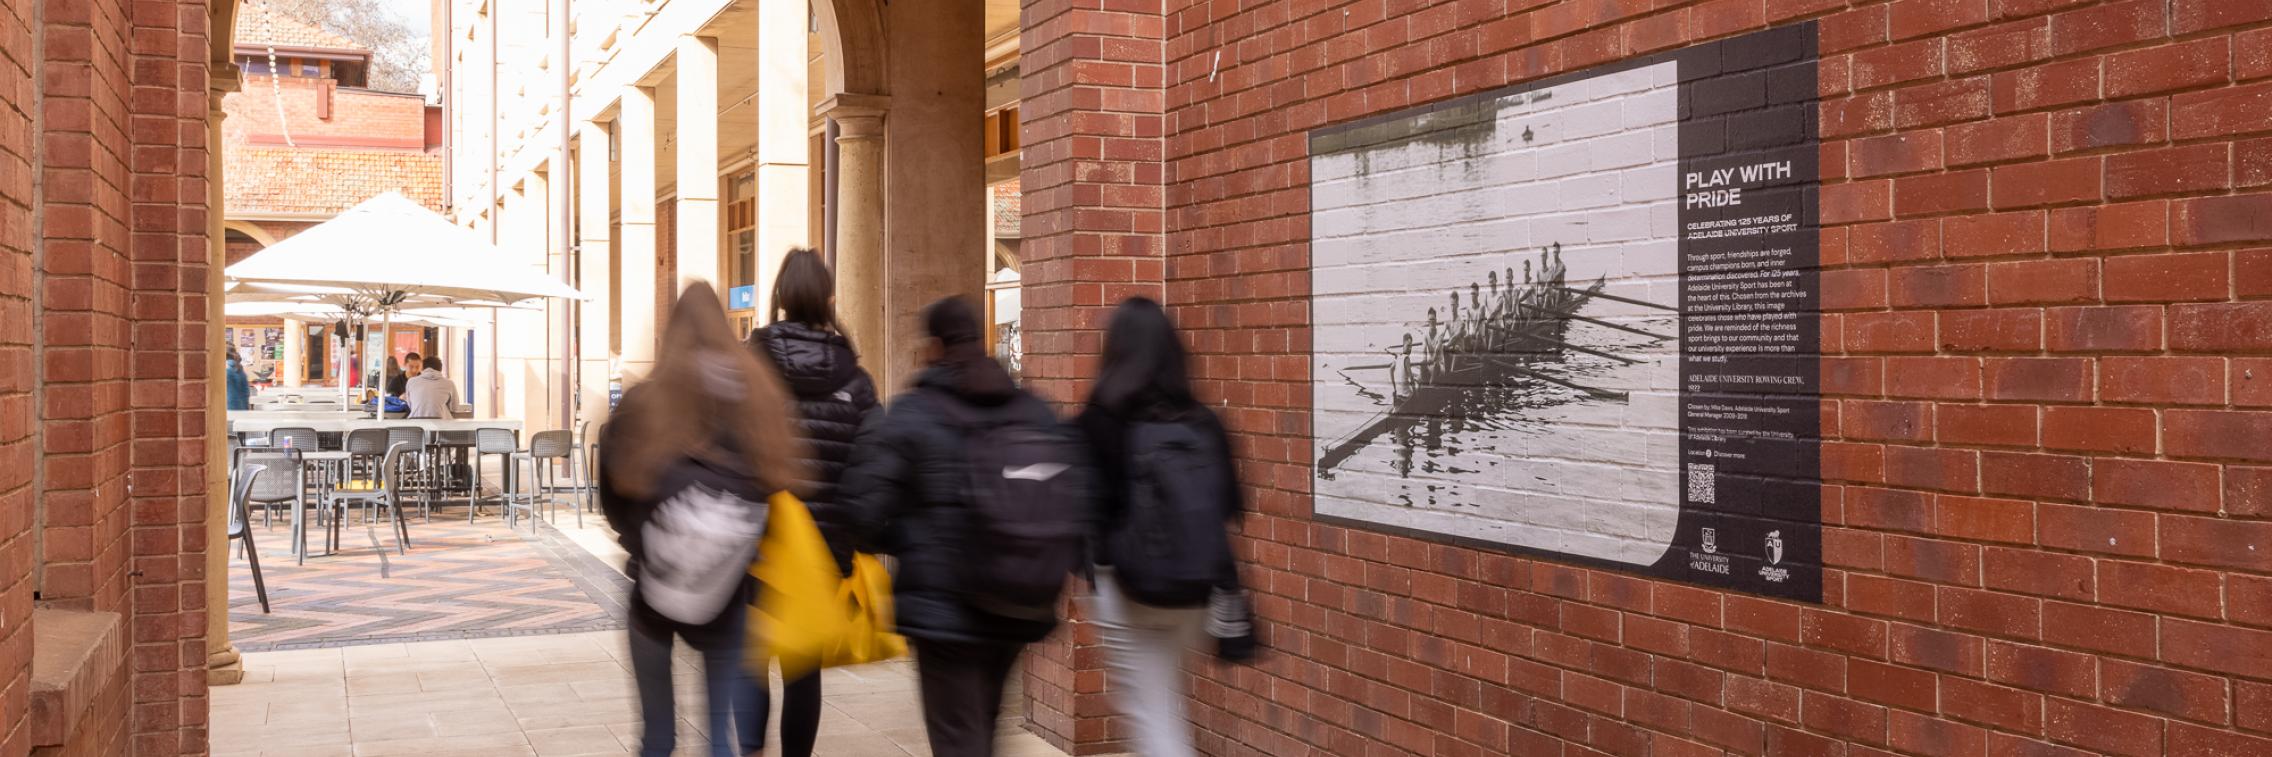 Students walking past Play with Pride Exhibition image pasted up on brick wall